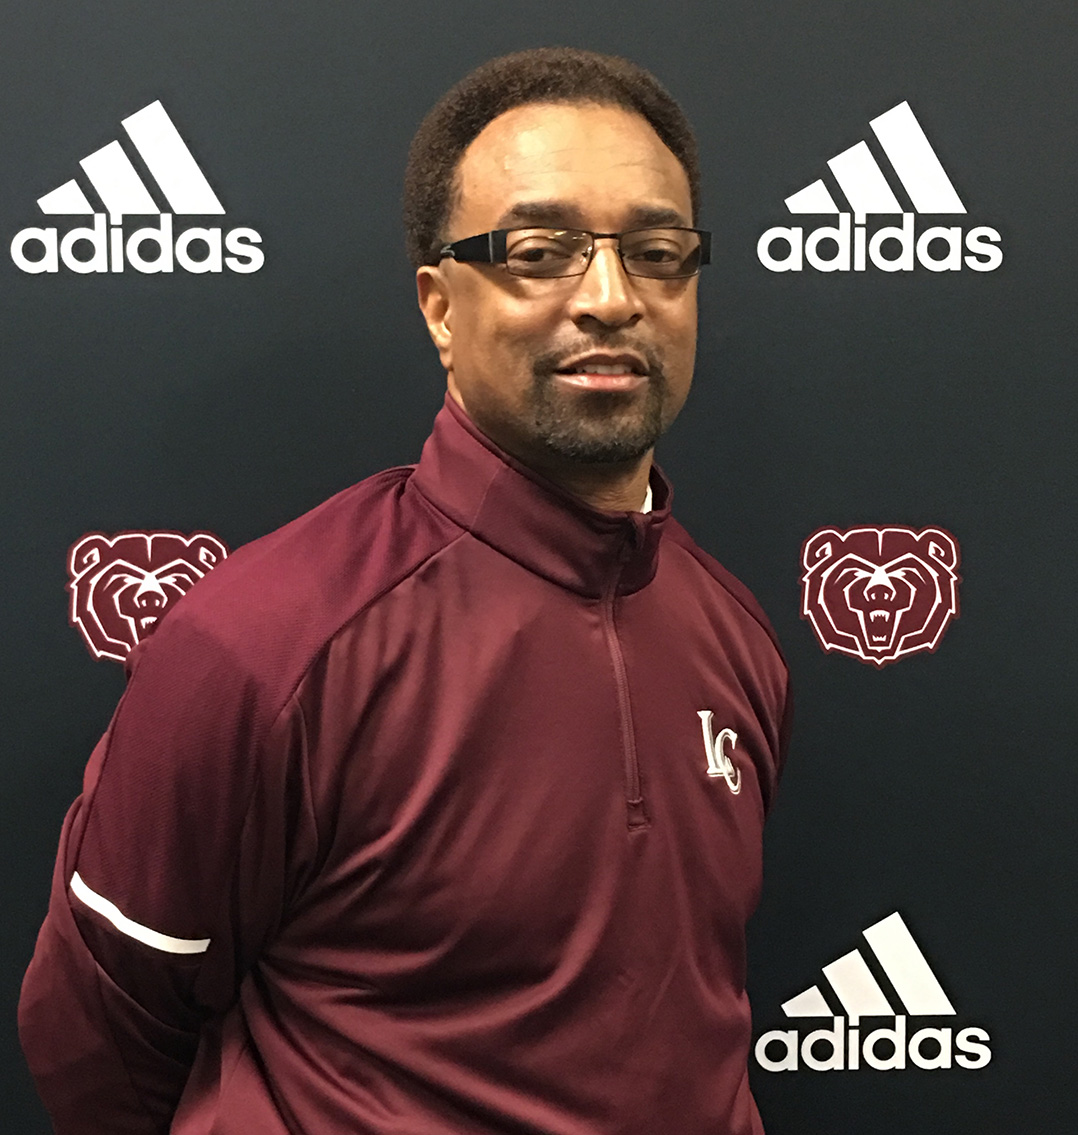 On the ball: New Lawrence Central High School athletic director